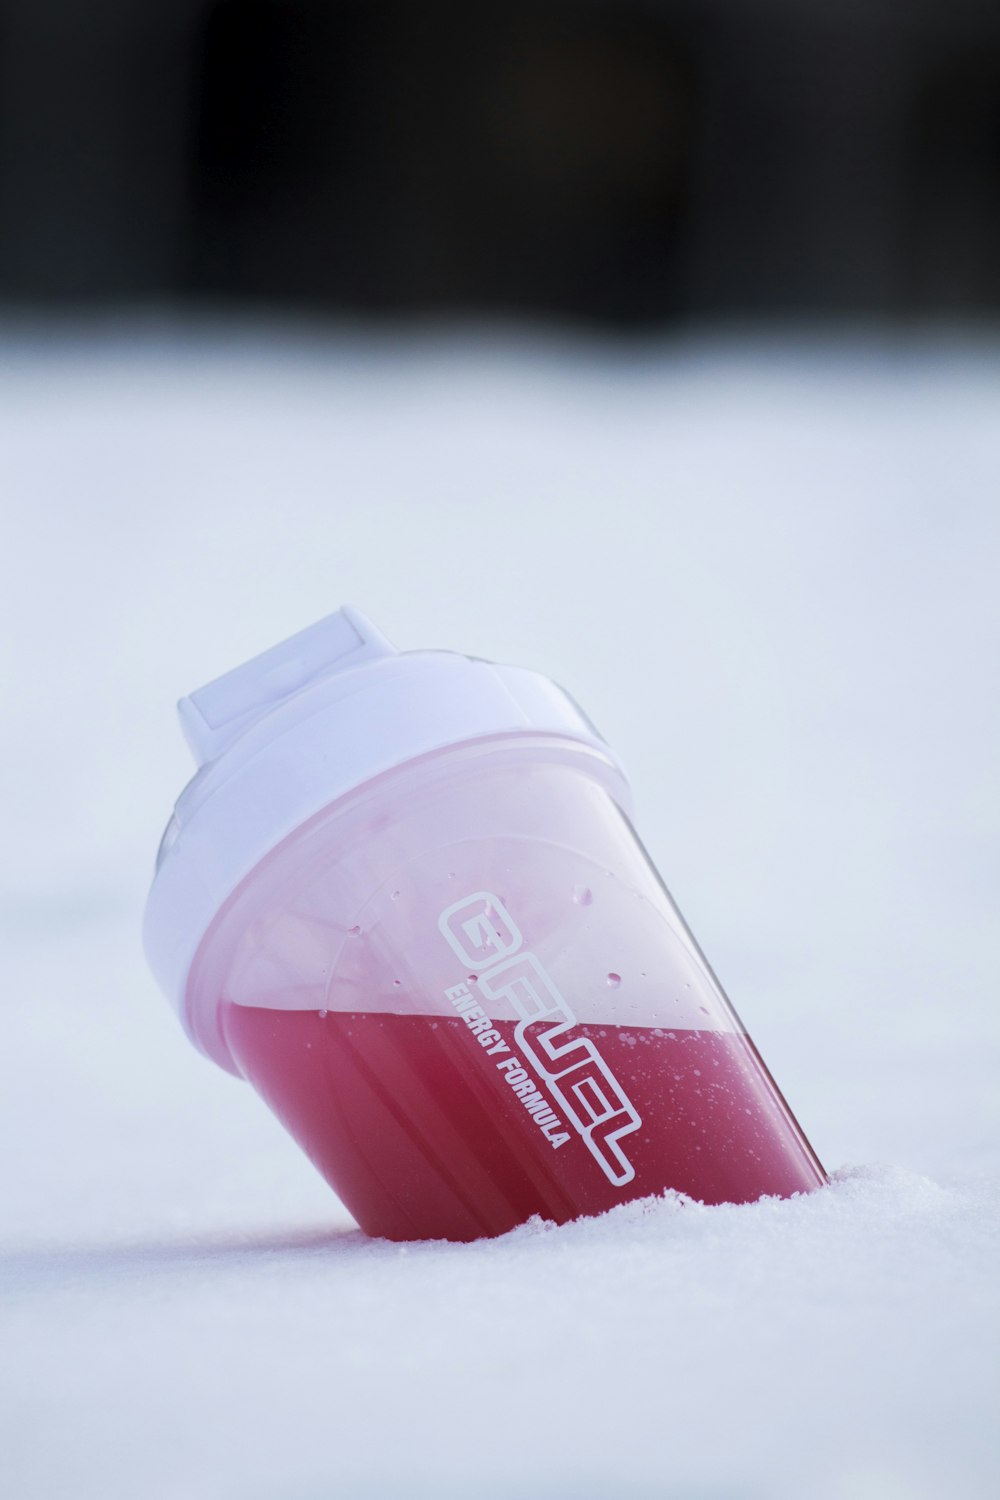 filled clear Gfuel bottle on ice